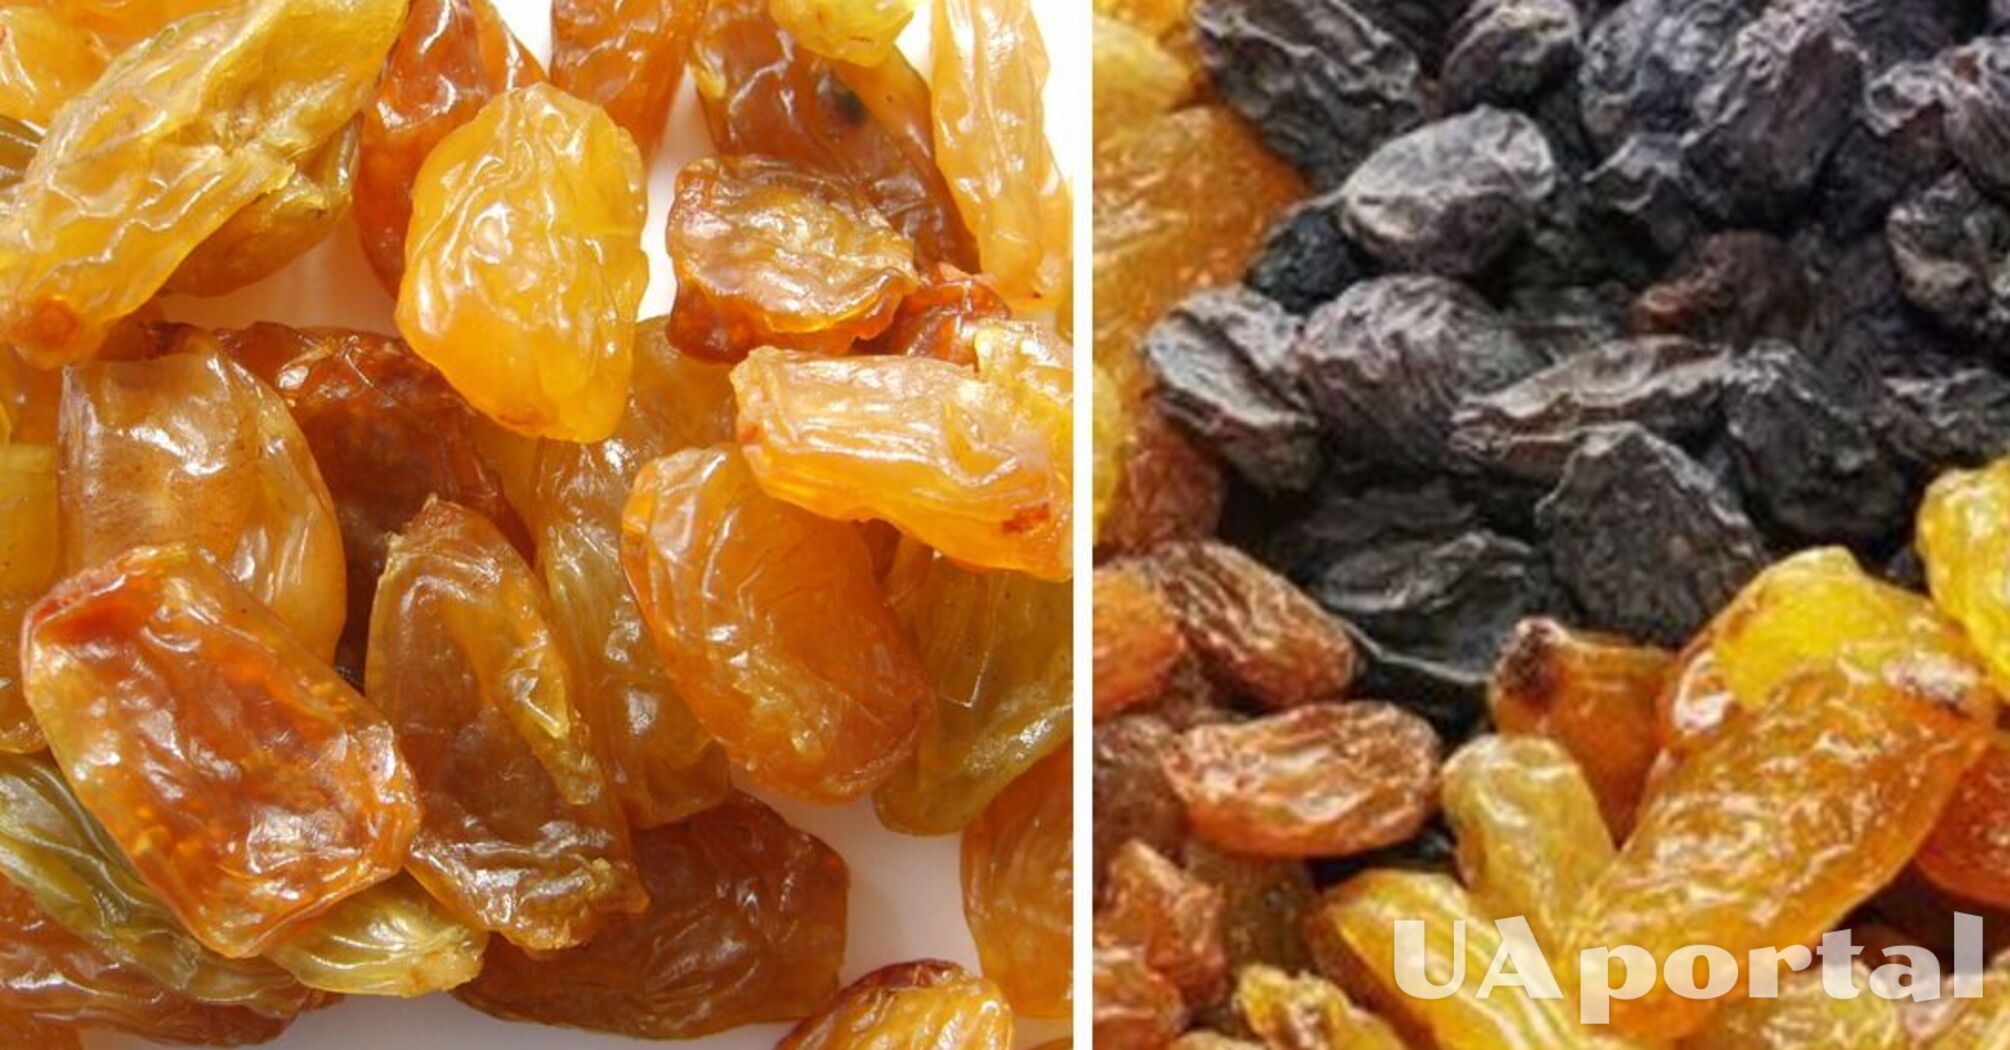 Calms the nervous system and increases hemoglobin: why you should eat raisins regularly